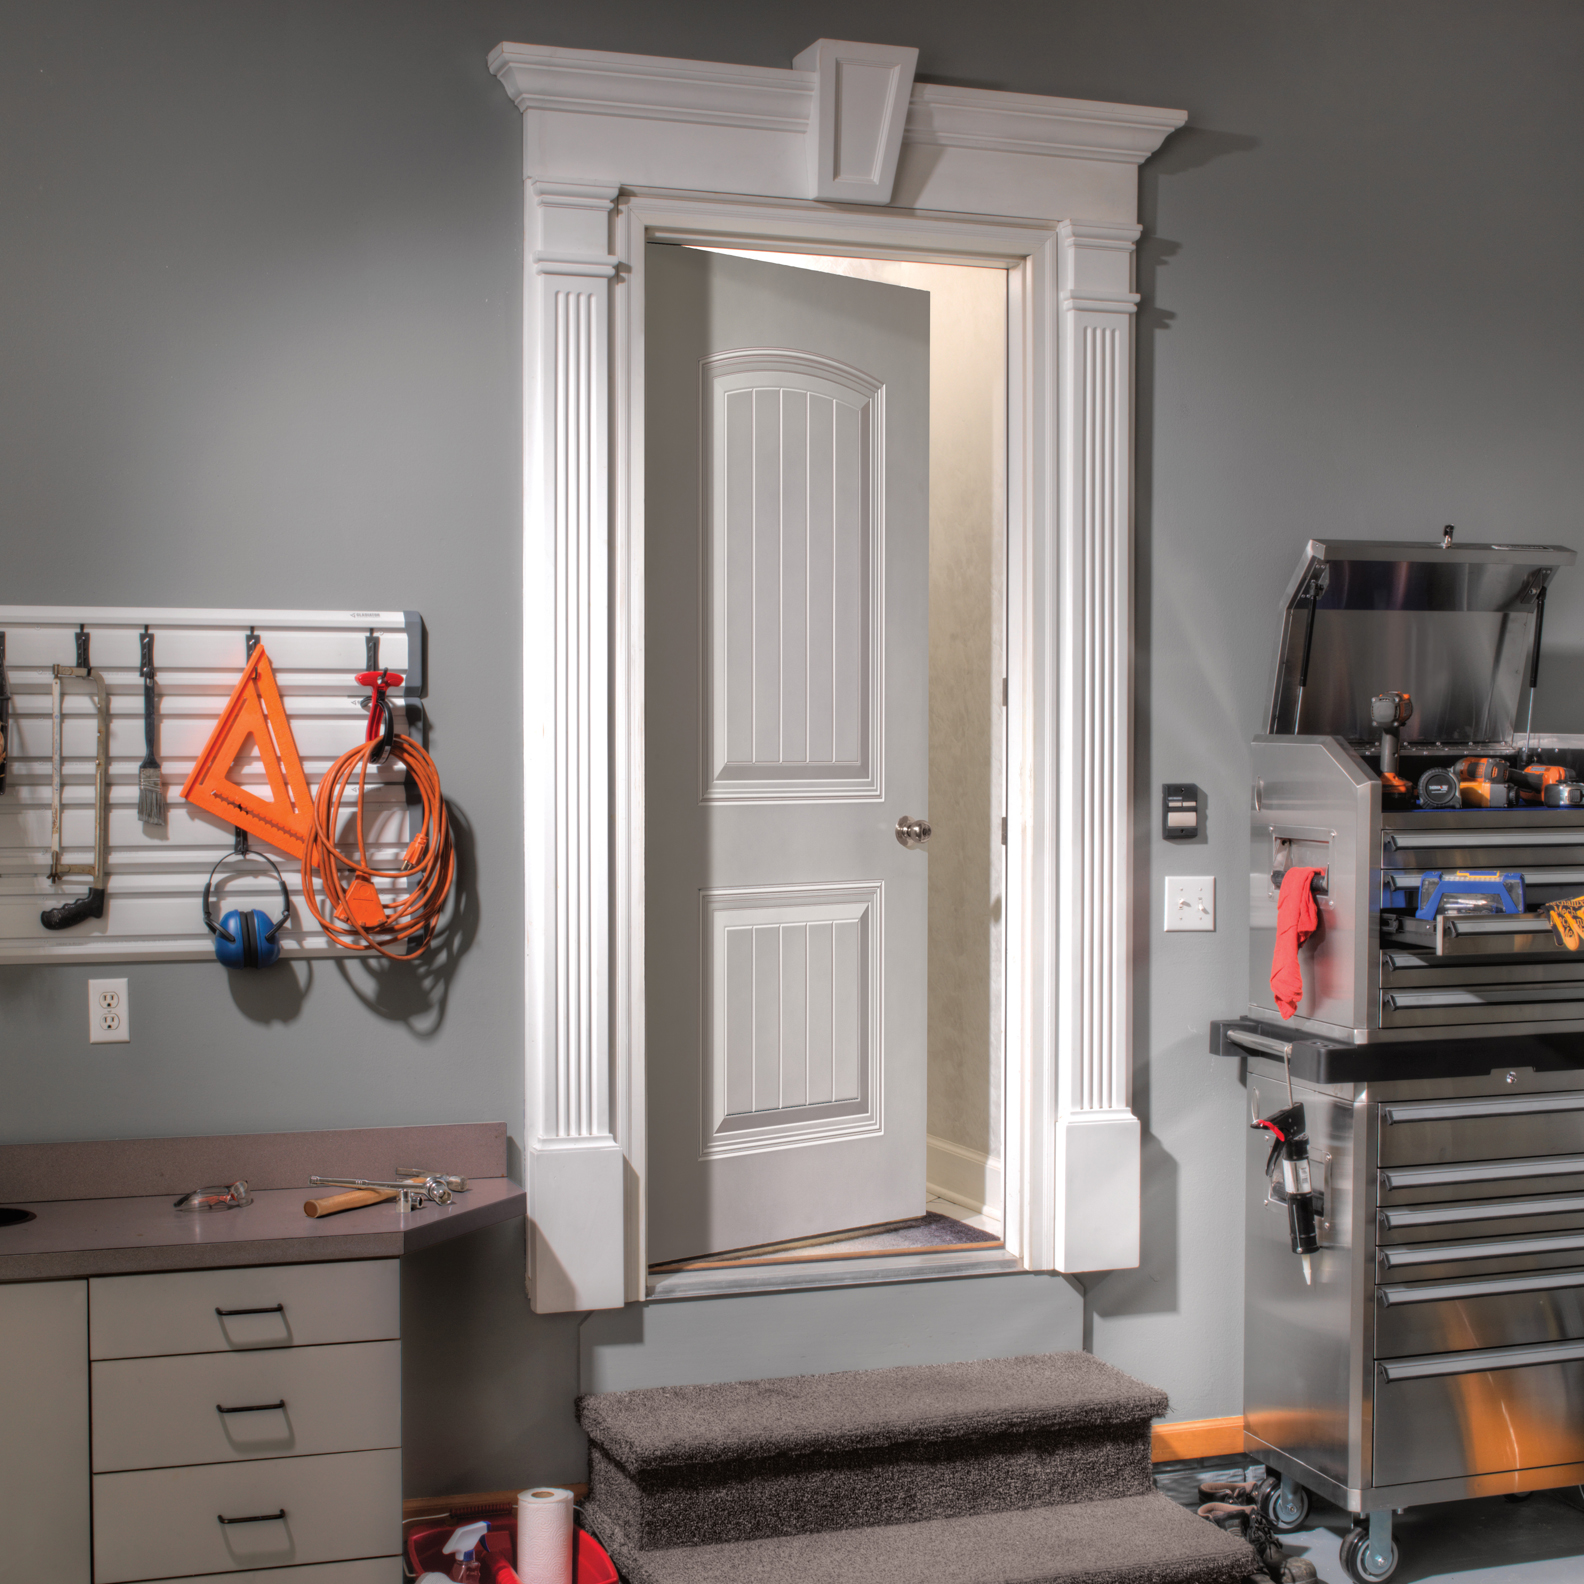 Safety First: Choosing Fire Rated Interior Doors For Your Home